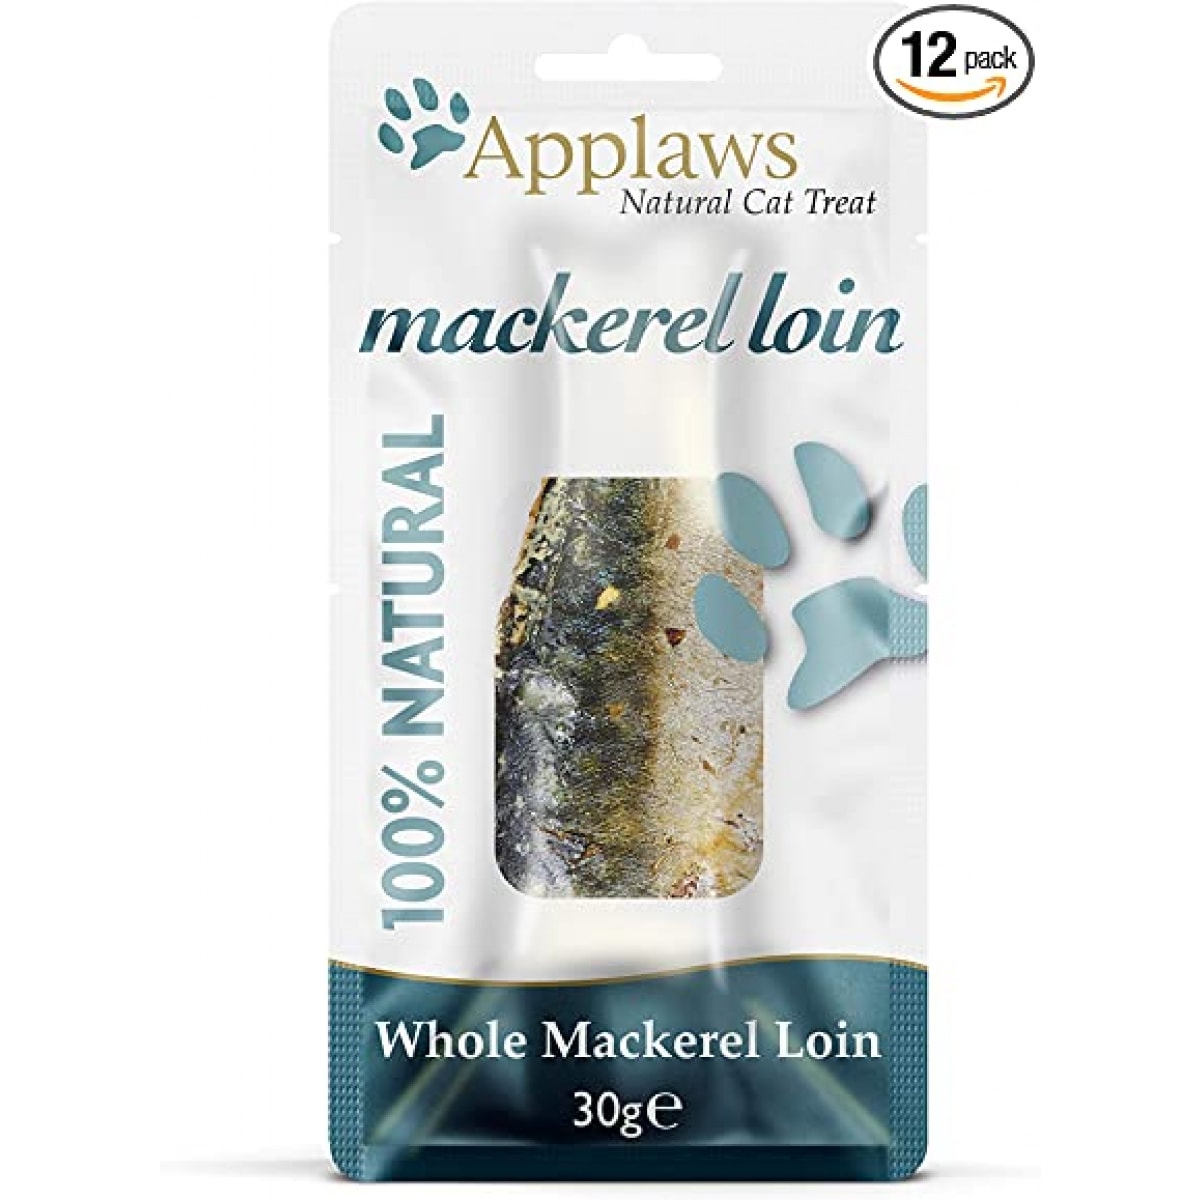 Applaws – Mackeral Loin – Pawfect Supplies Ltd Product Image